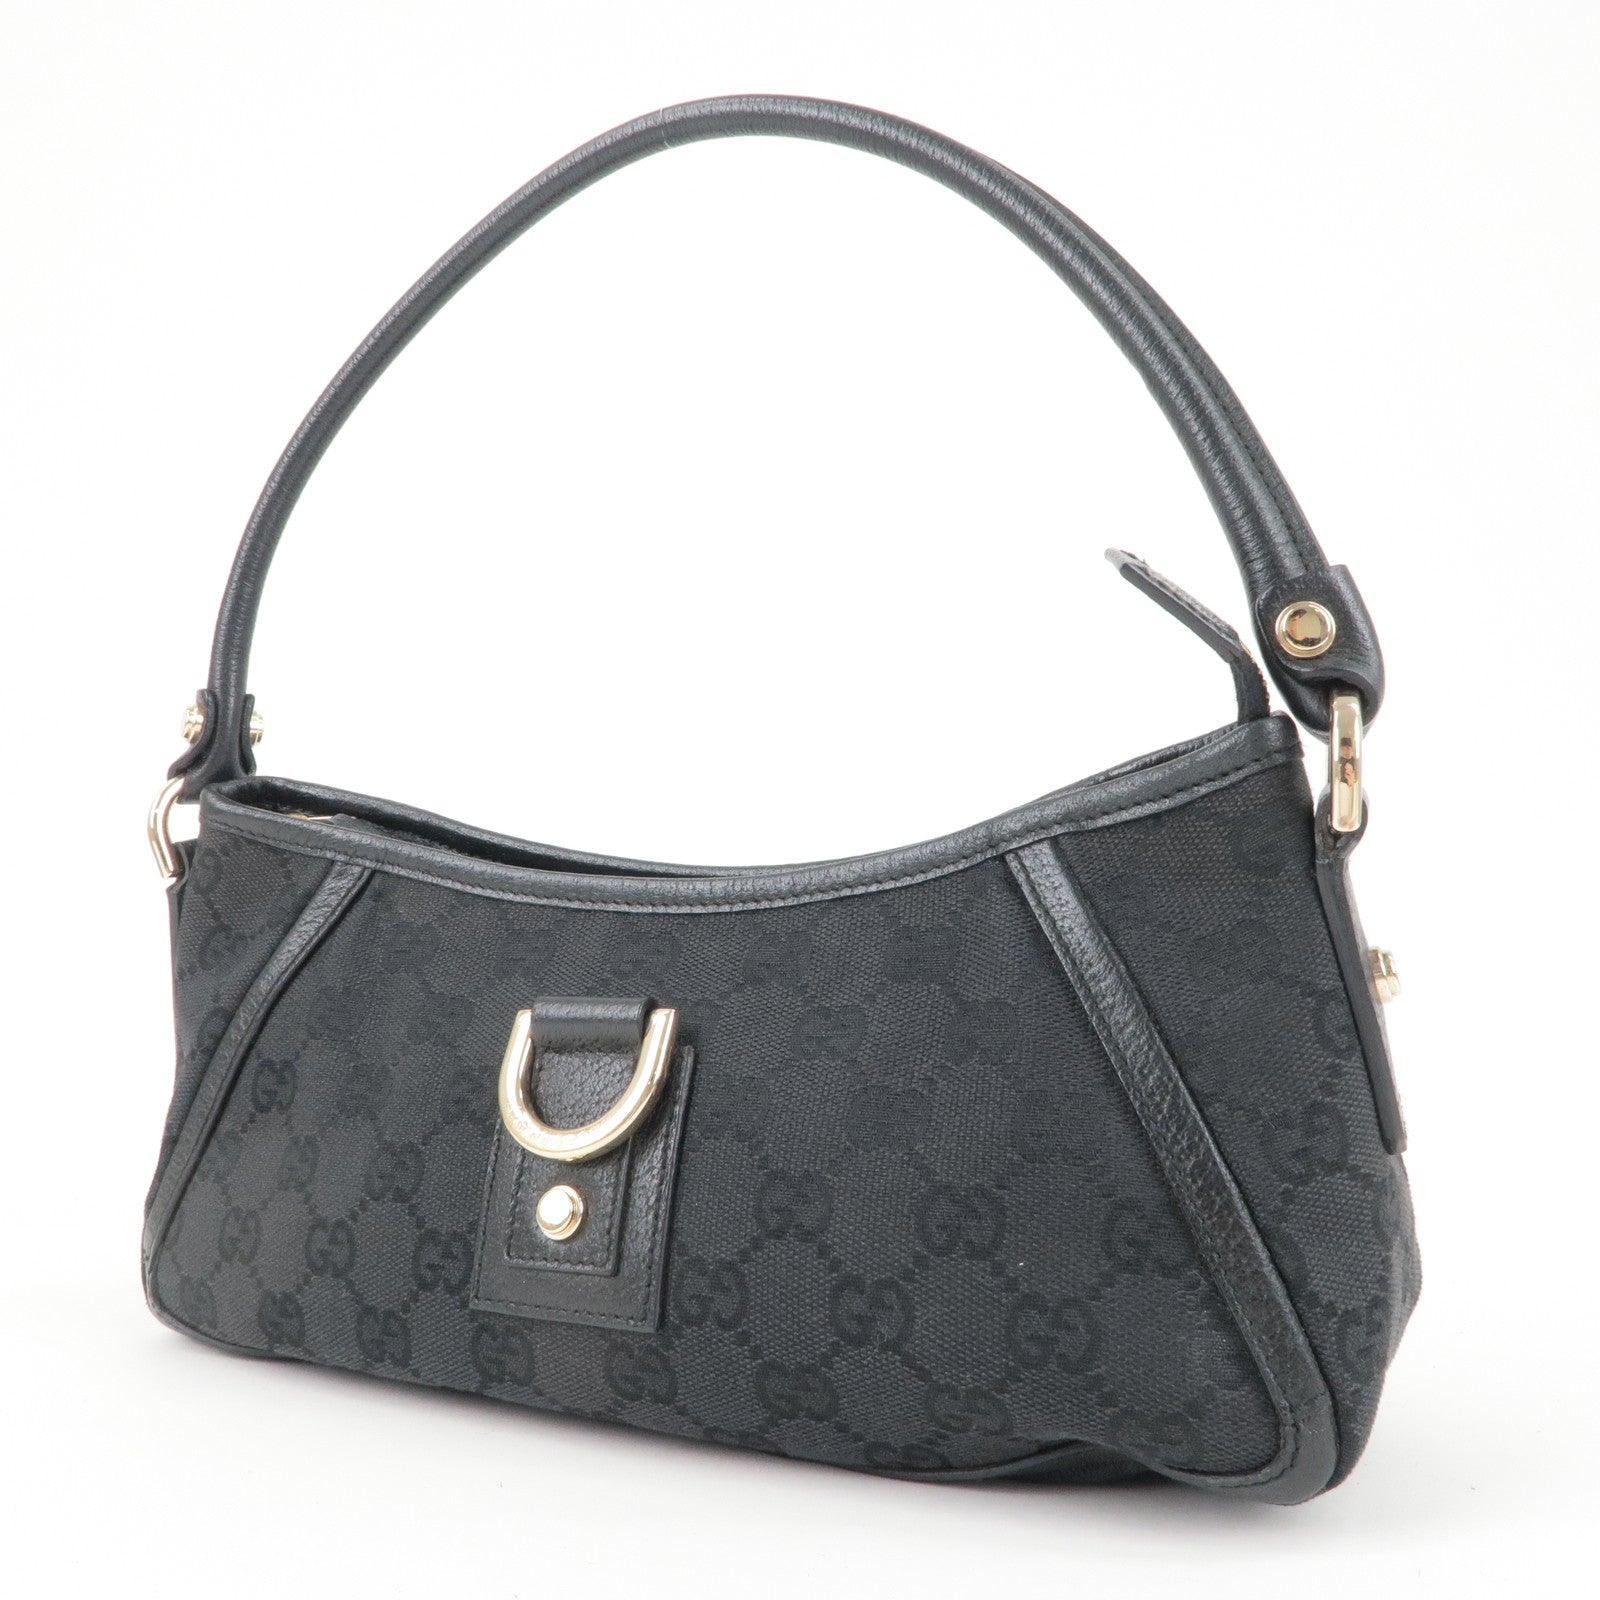 Gucci Vintage - Leather Abbey D-Ring Hobo Bag - Black - Leather